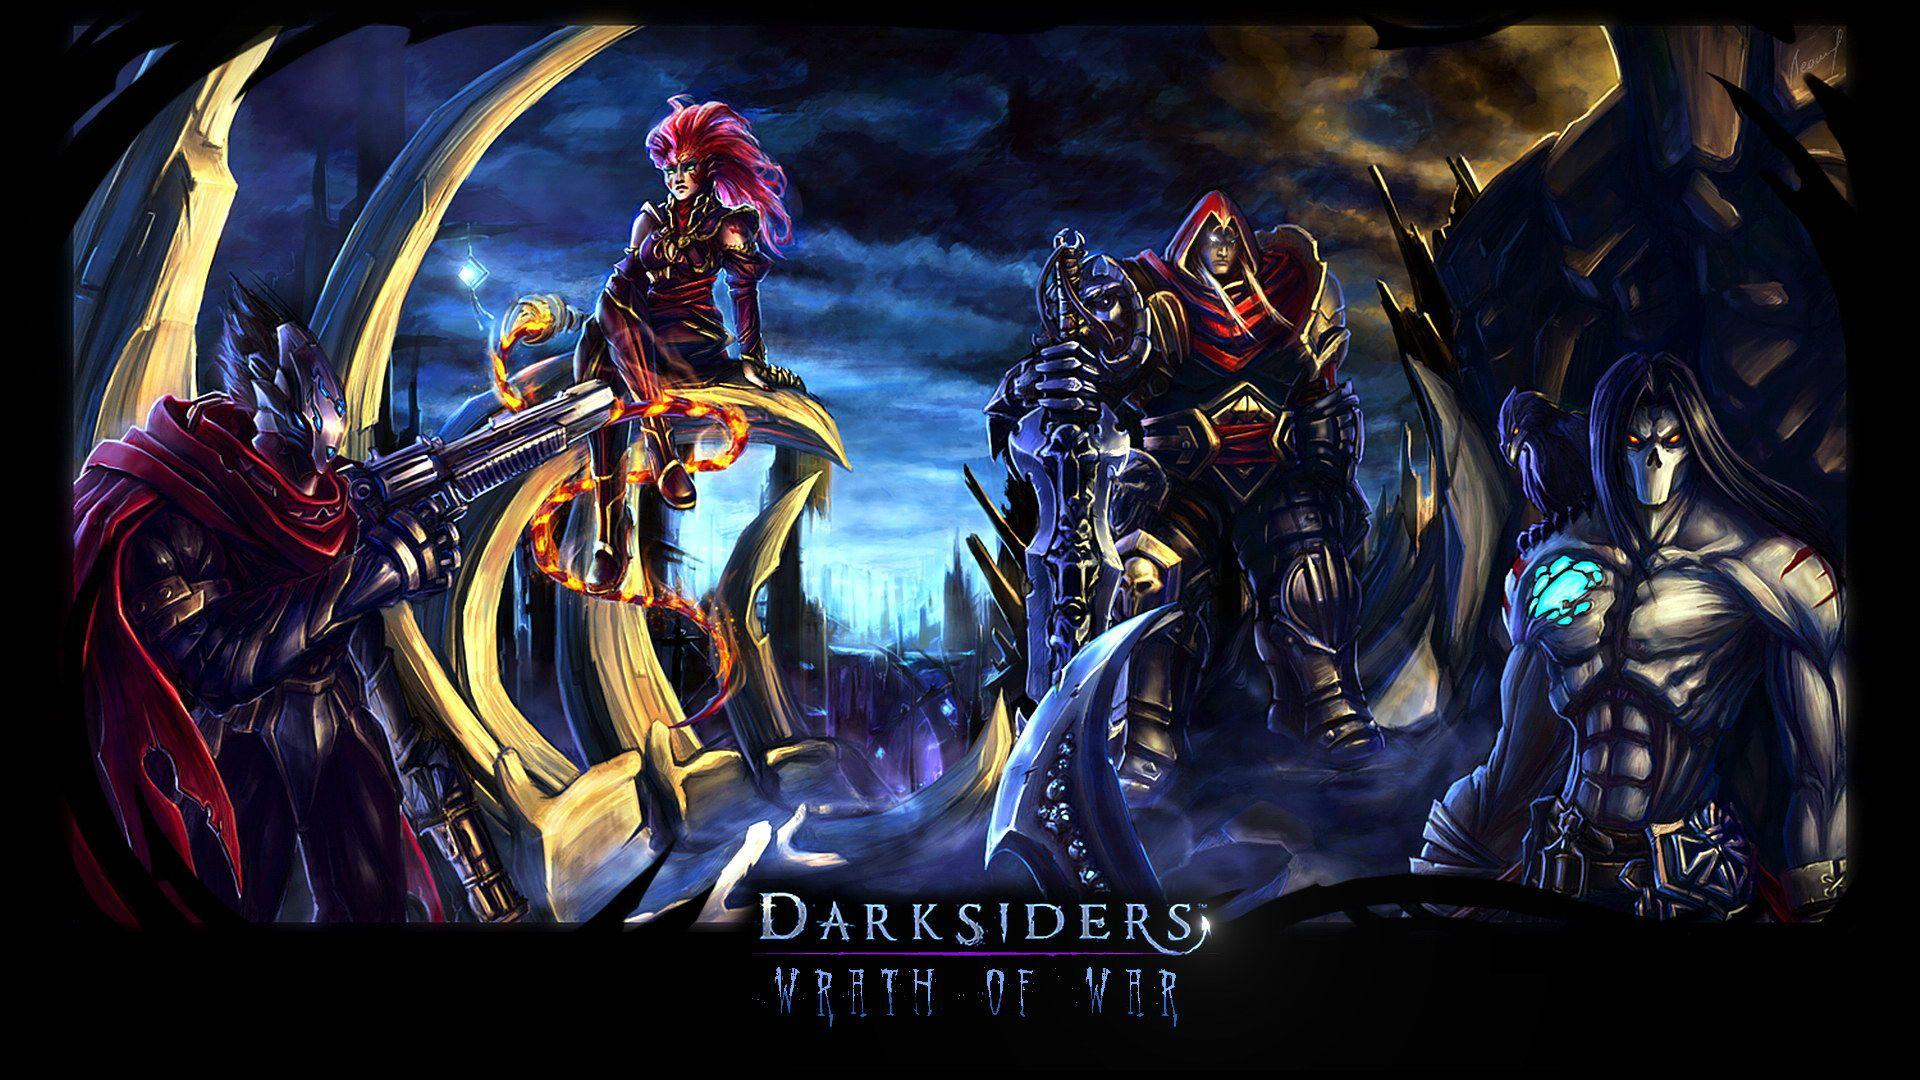 Darksiders Fury Design Stolen or Inspired? I was searching the net